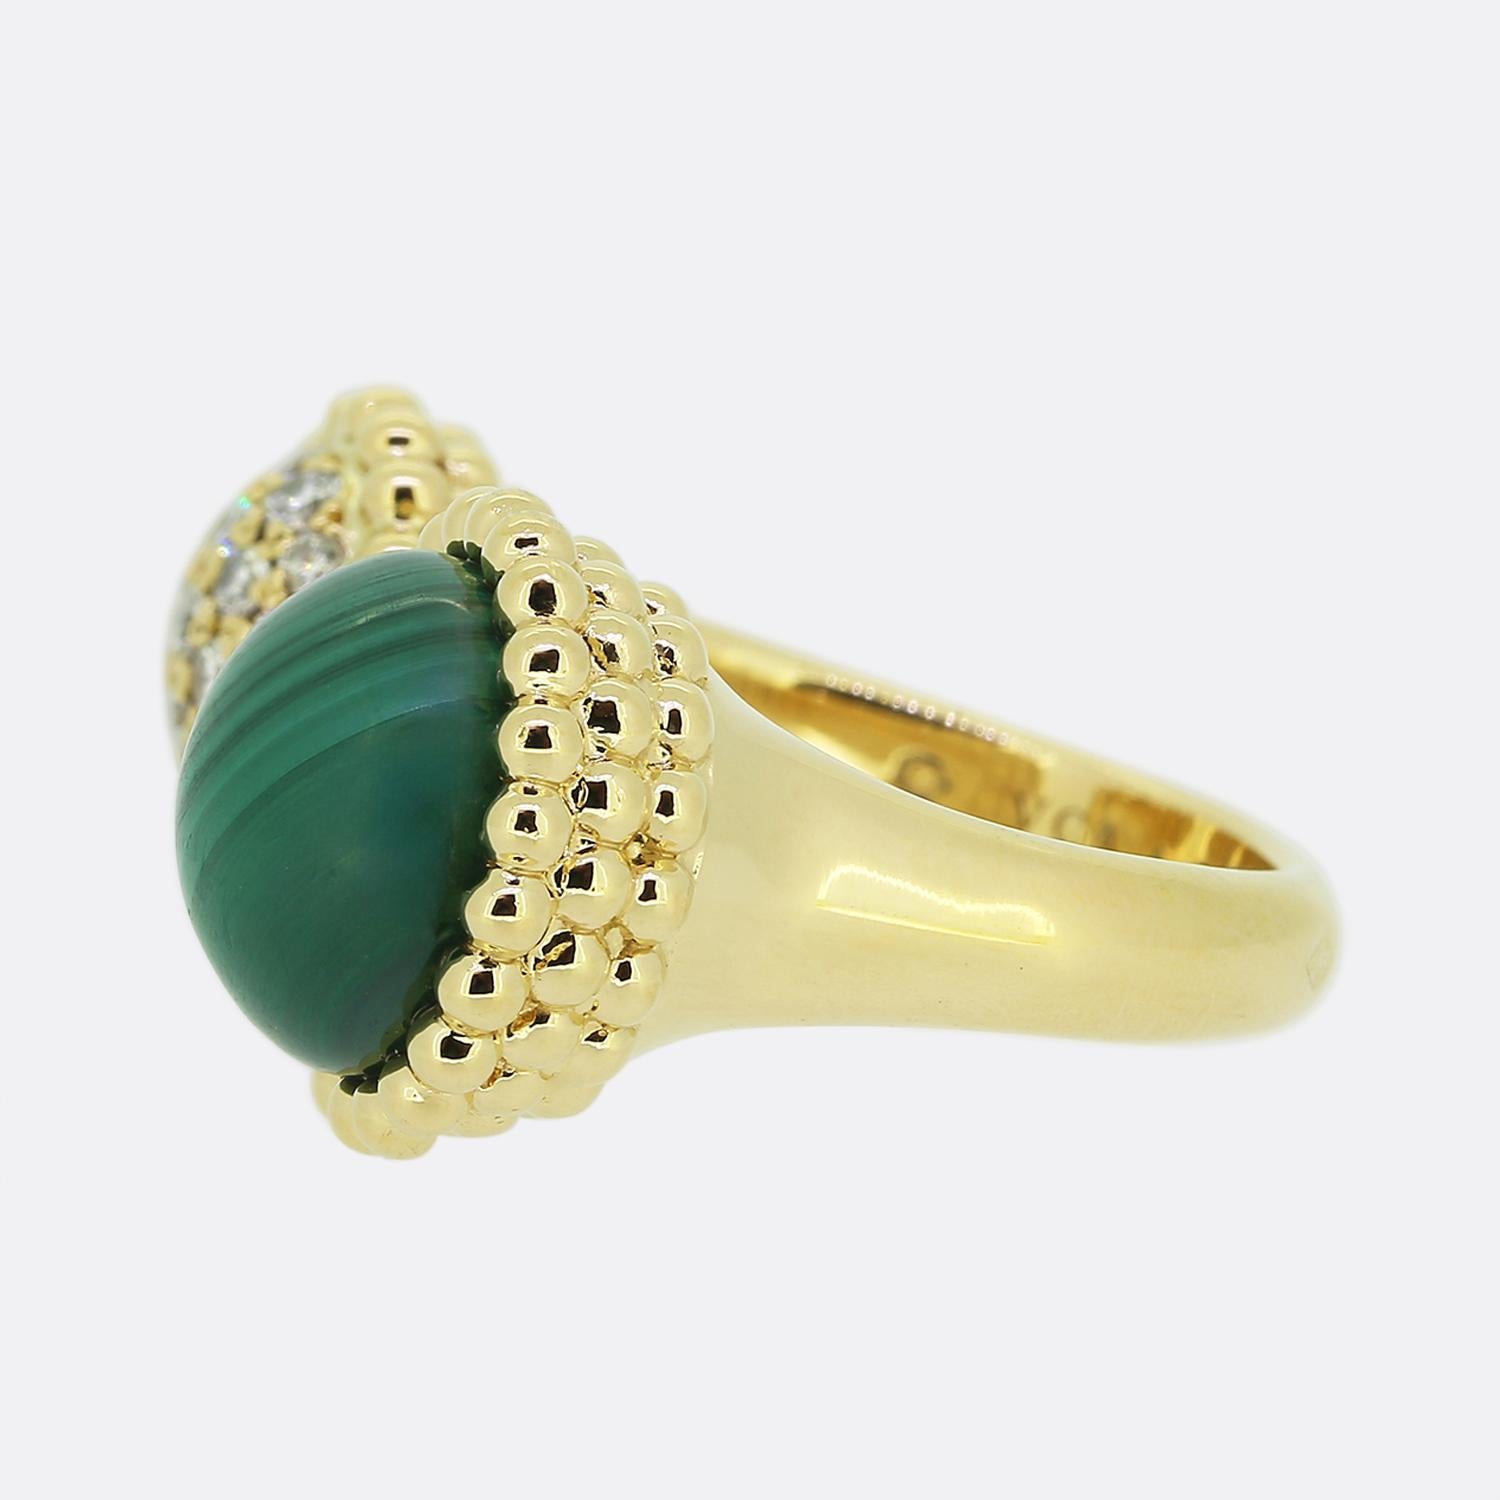 Here we have wonderful creation from the world renowned luxury jewellery designer Van Cleef & Arpels. This ring has been crafted from 18ct yellow gold and showcases and open design consisting of two round motifs, both of which are contained within a